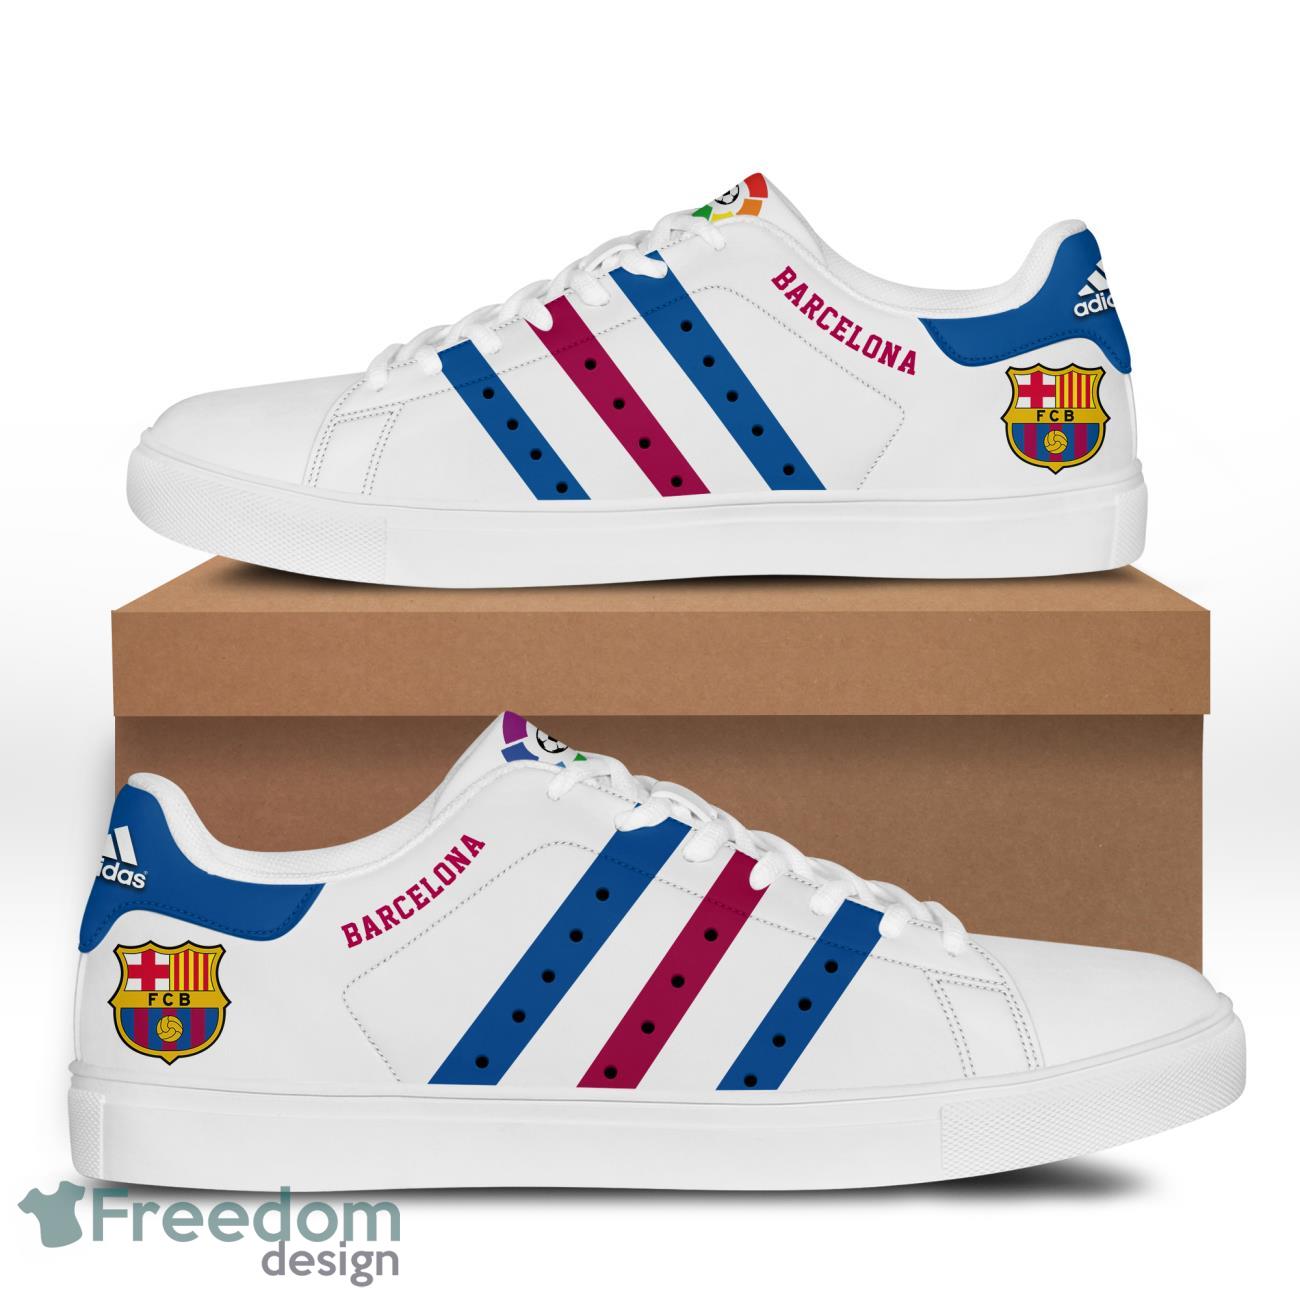 FC Barcelona Skate Stan Smith Shoes Product Photo 1